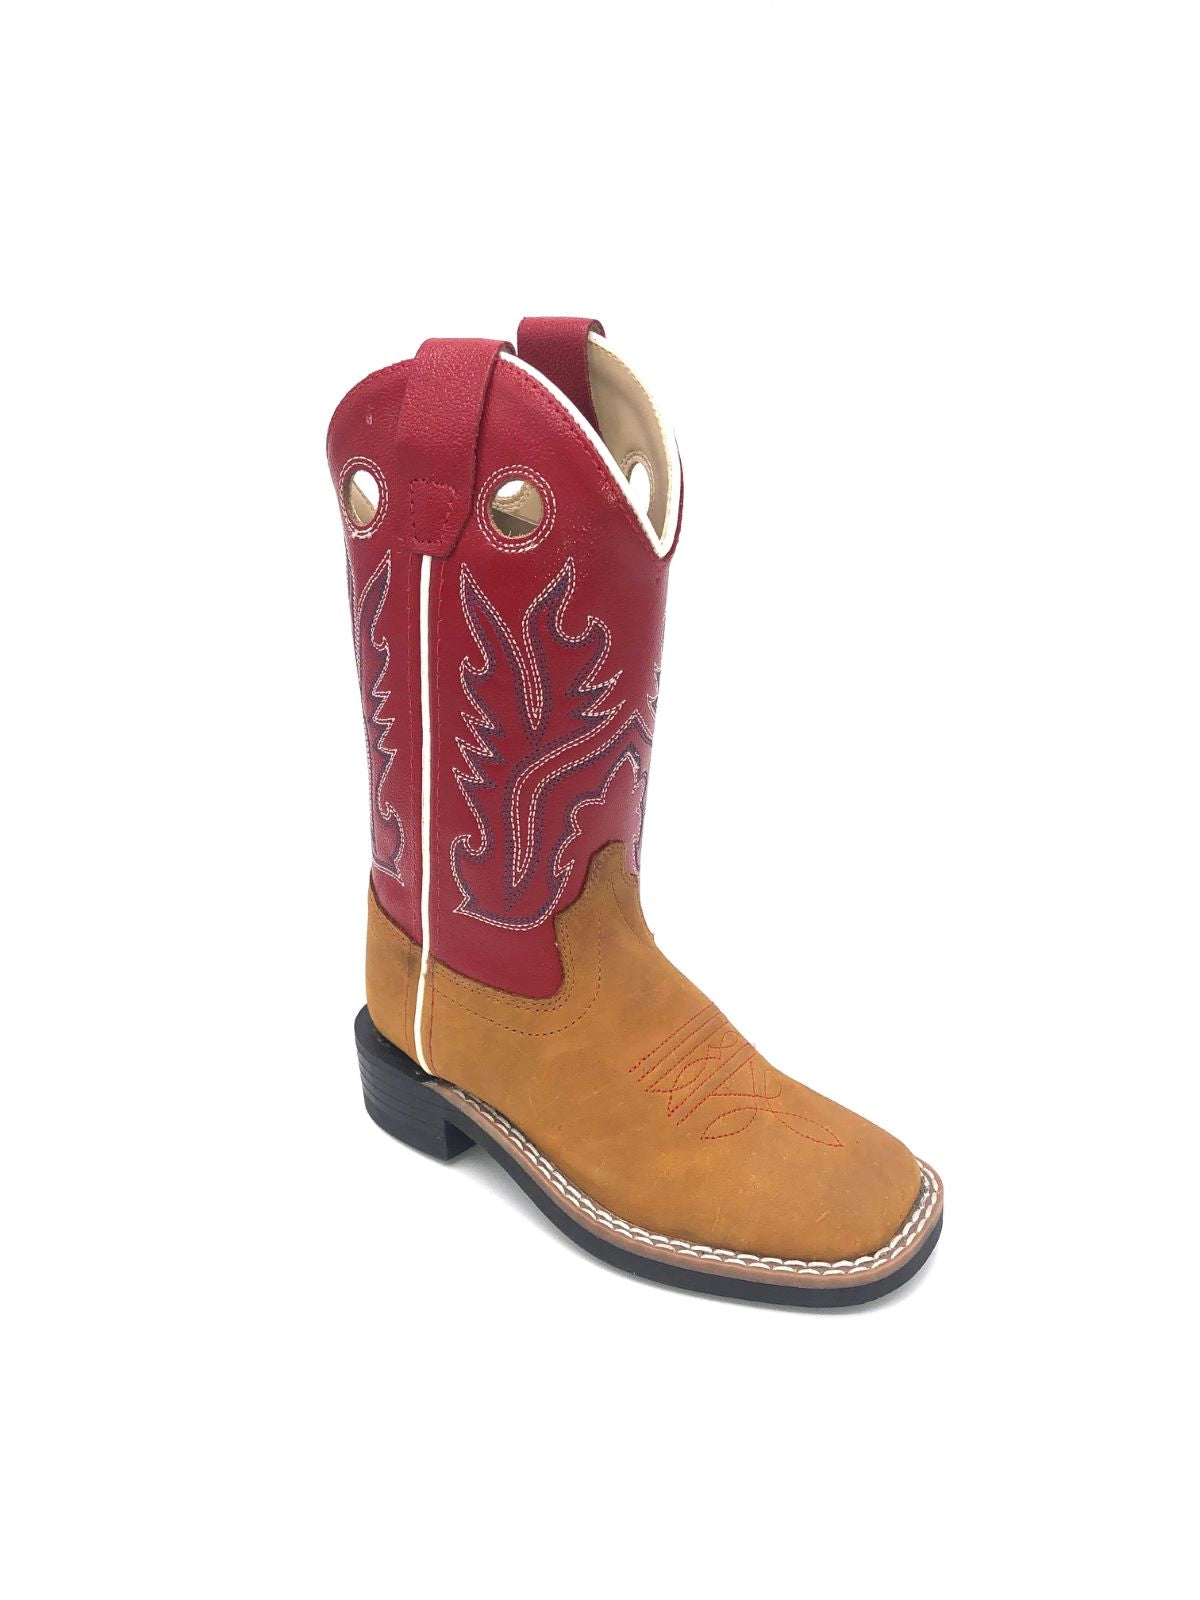 'Old West' Children's Ultra Flex Western Broad Square Toe - Tan / Red